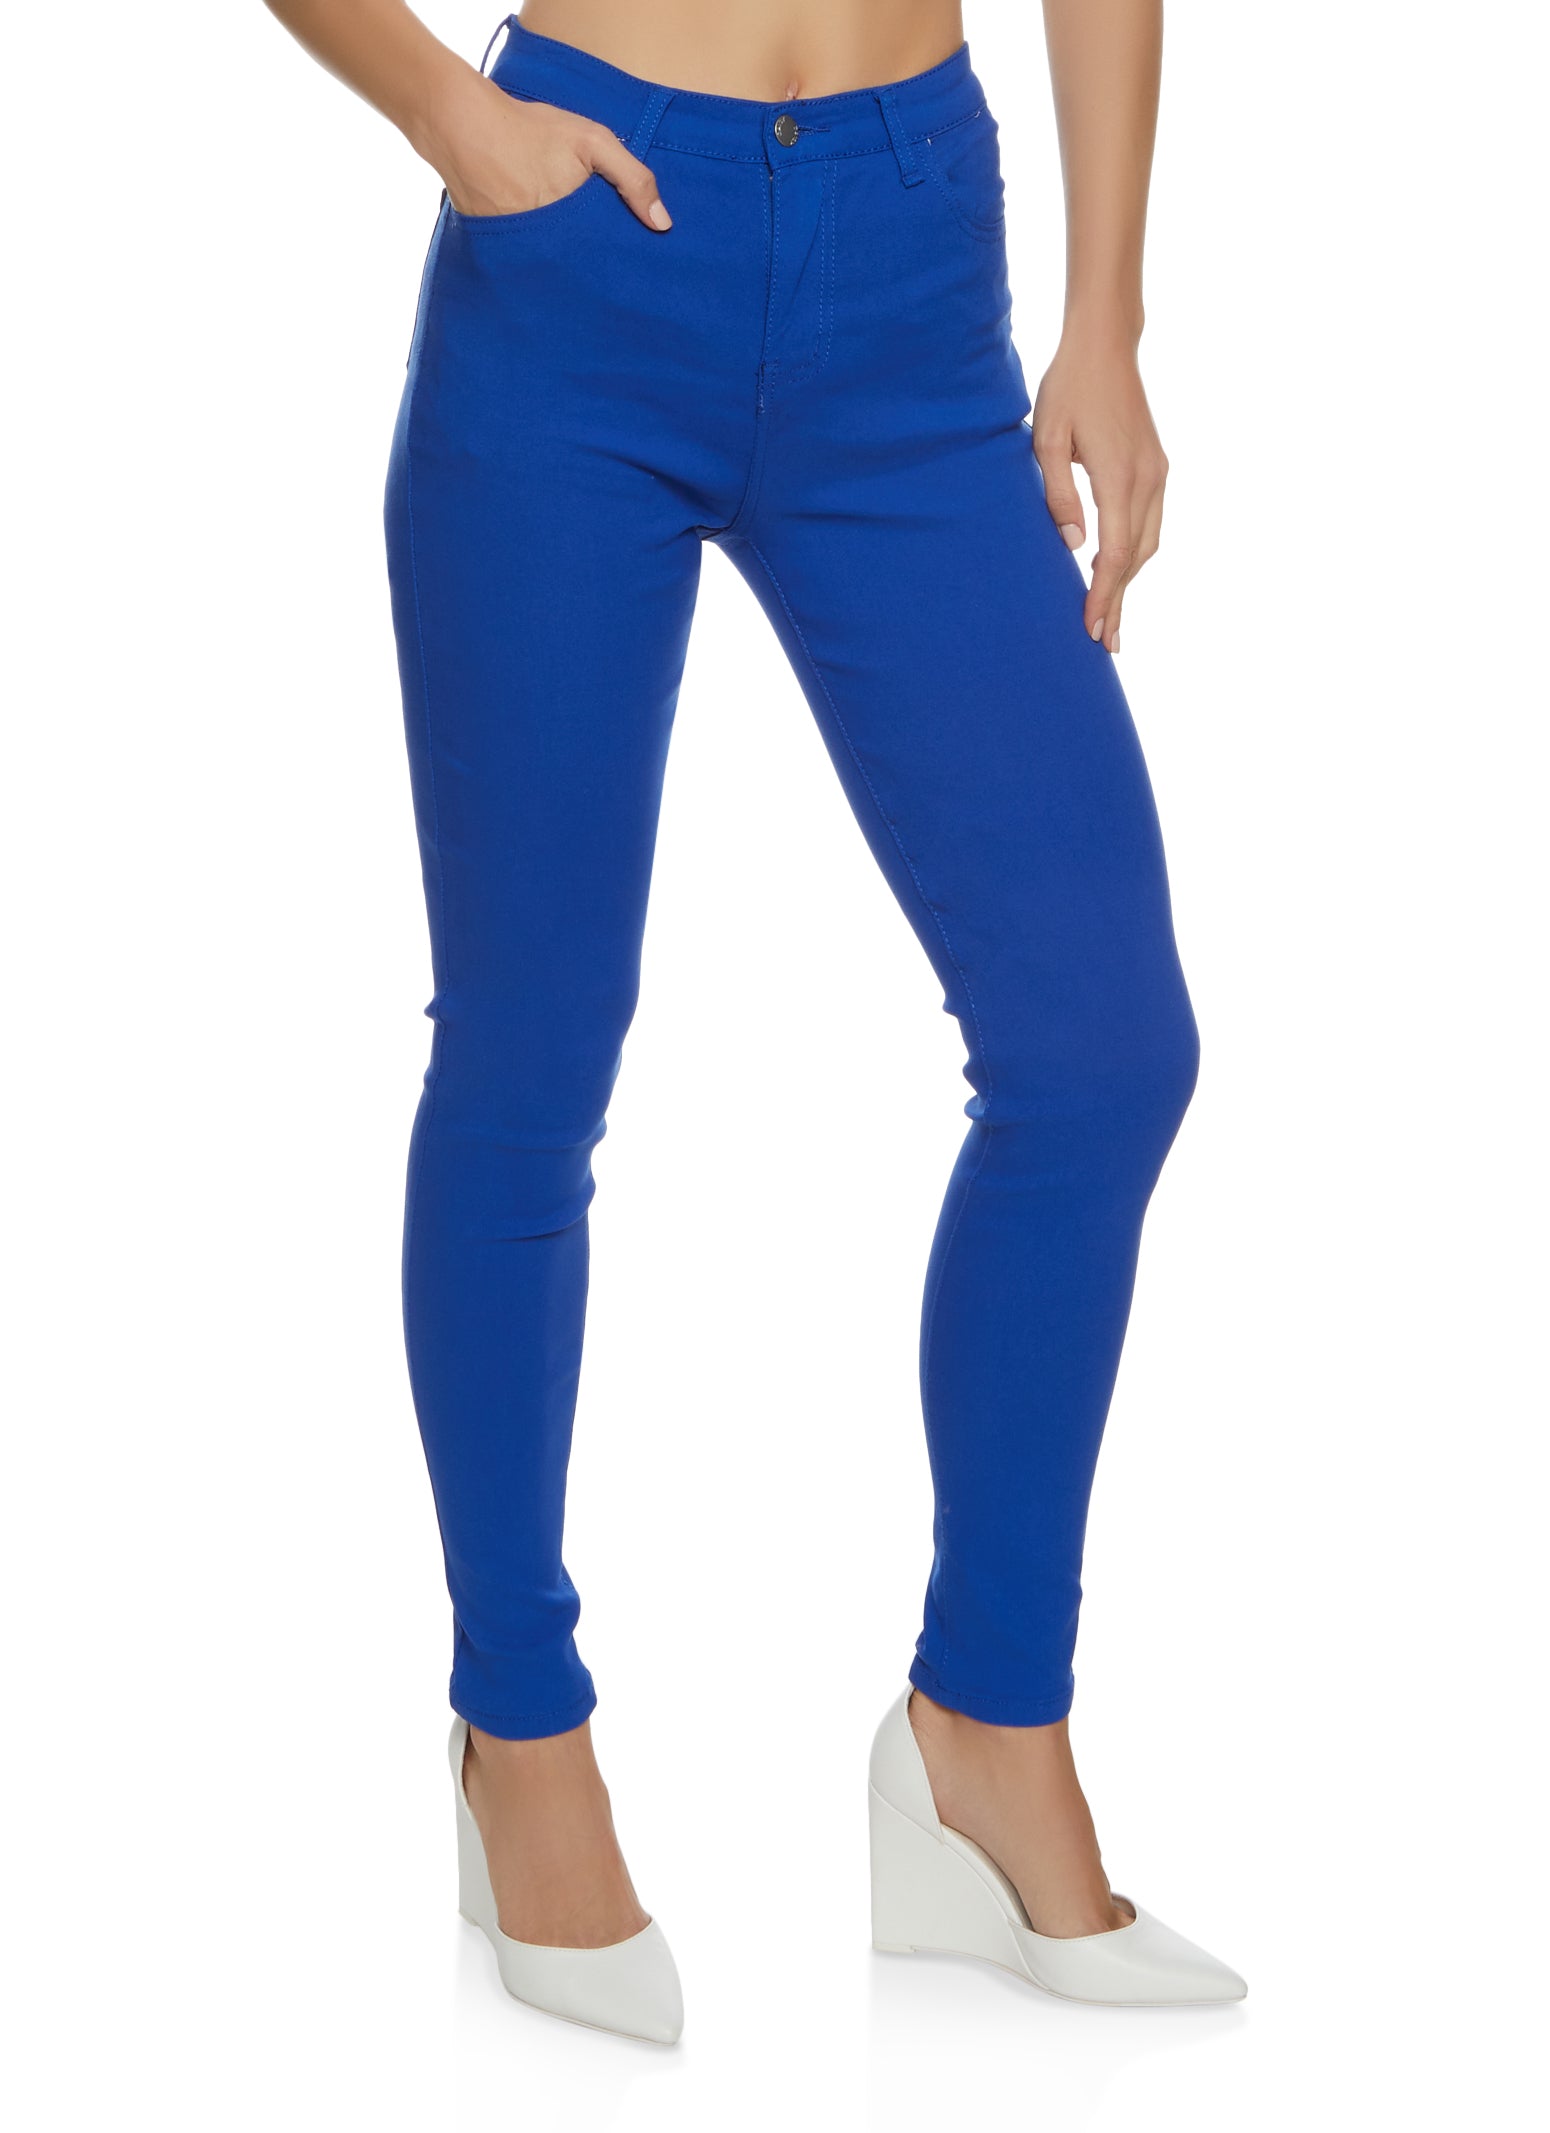 Solid High Waist Skinny Jeans - Royal Blue